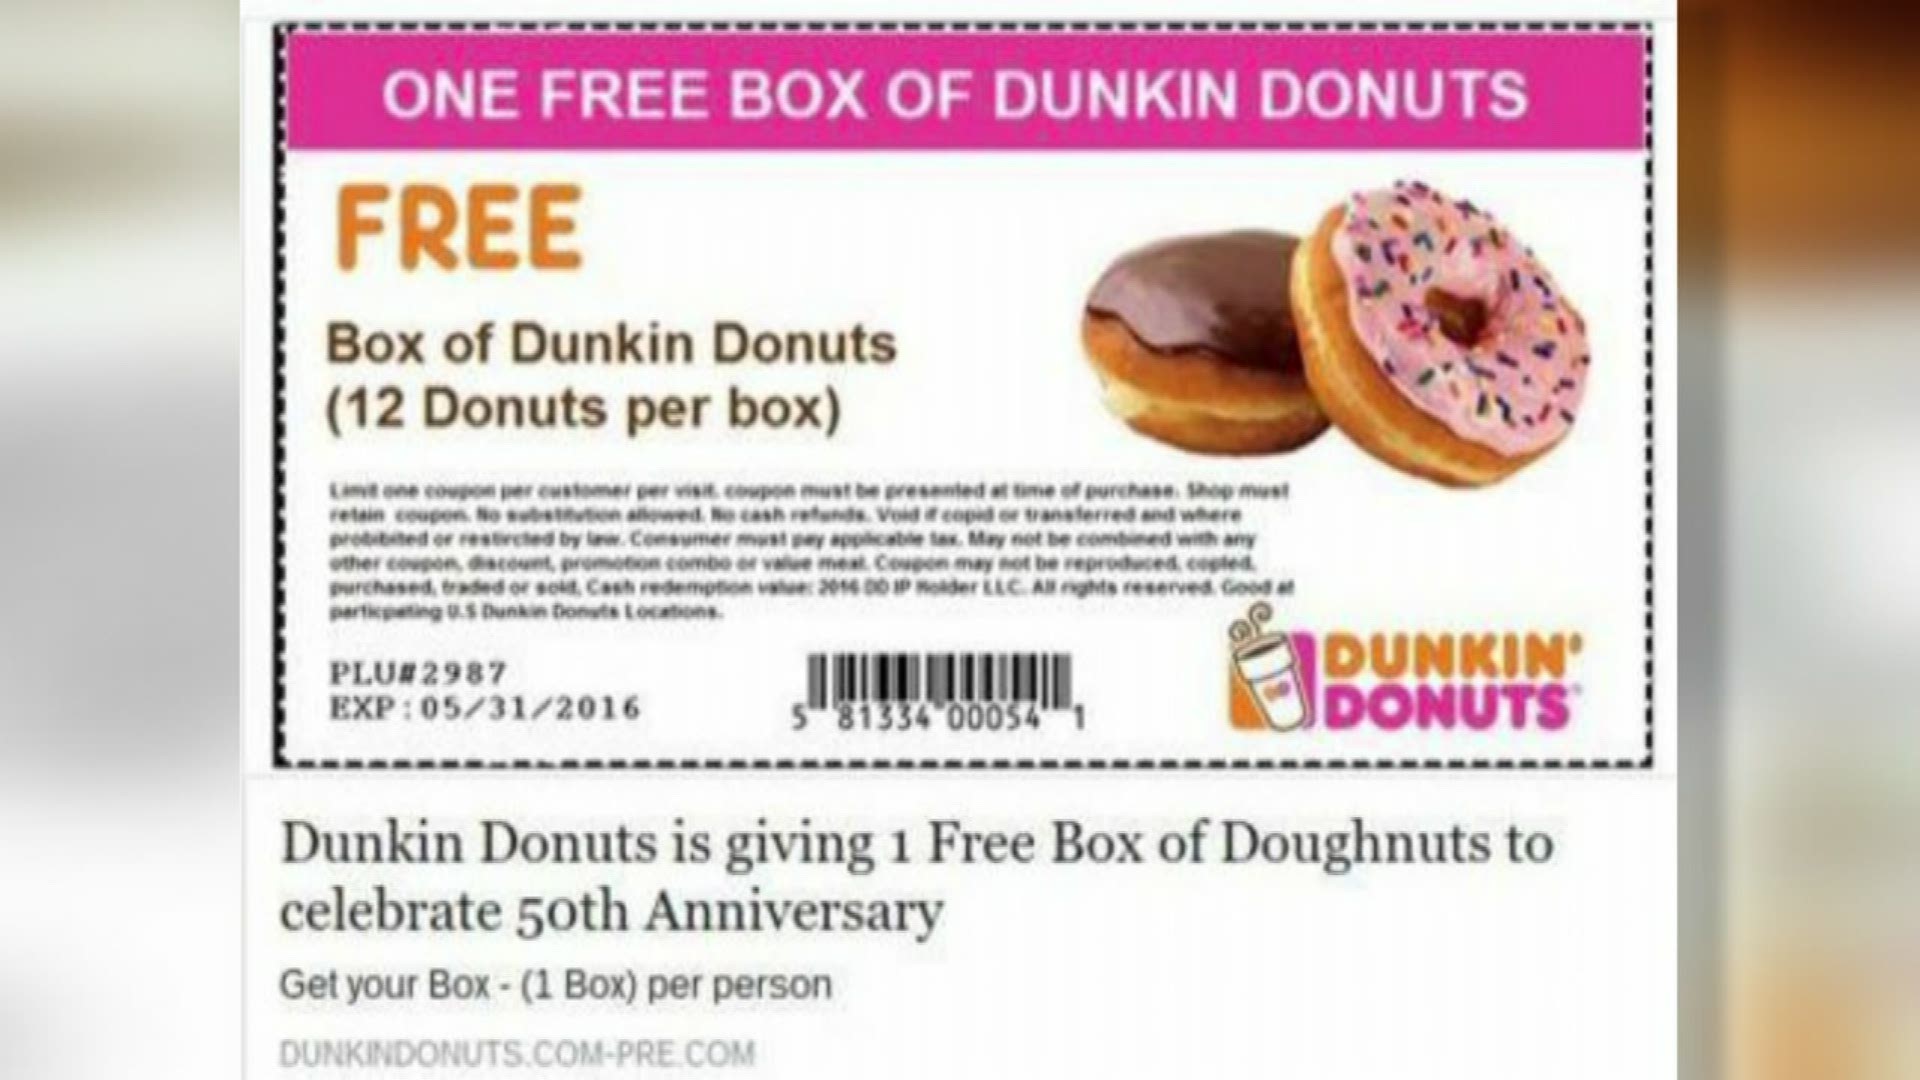 Verify Is Dunkin' Donuts coupon for real?